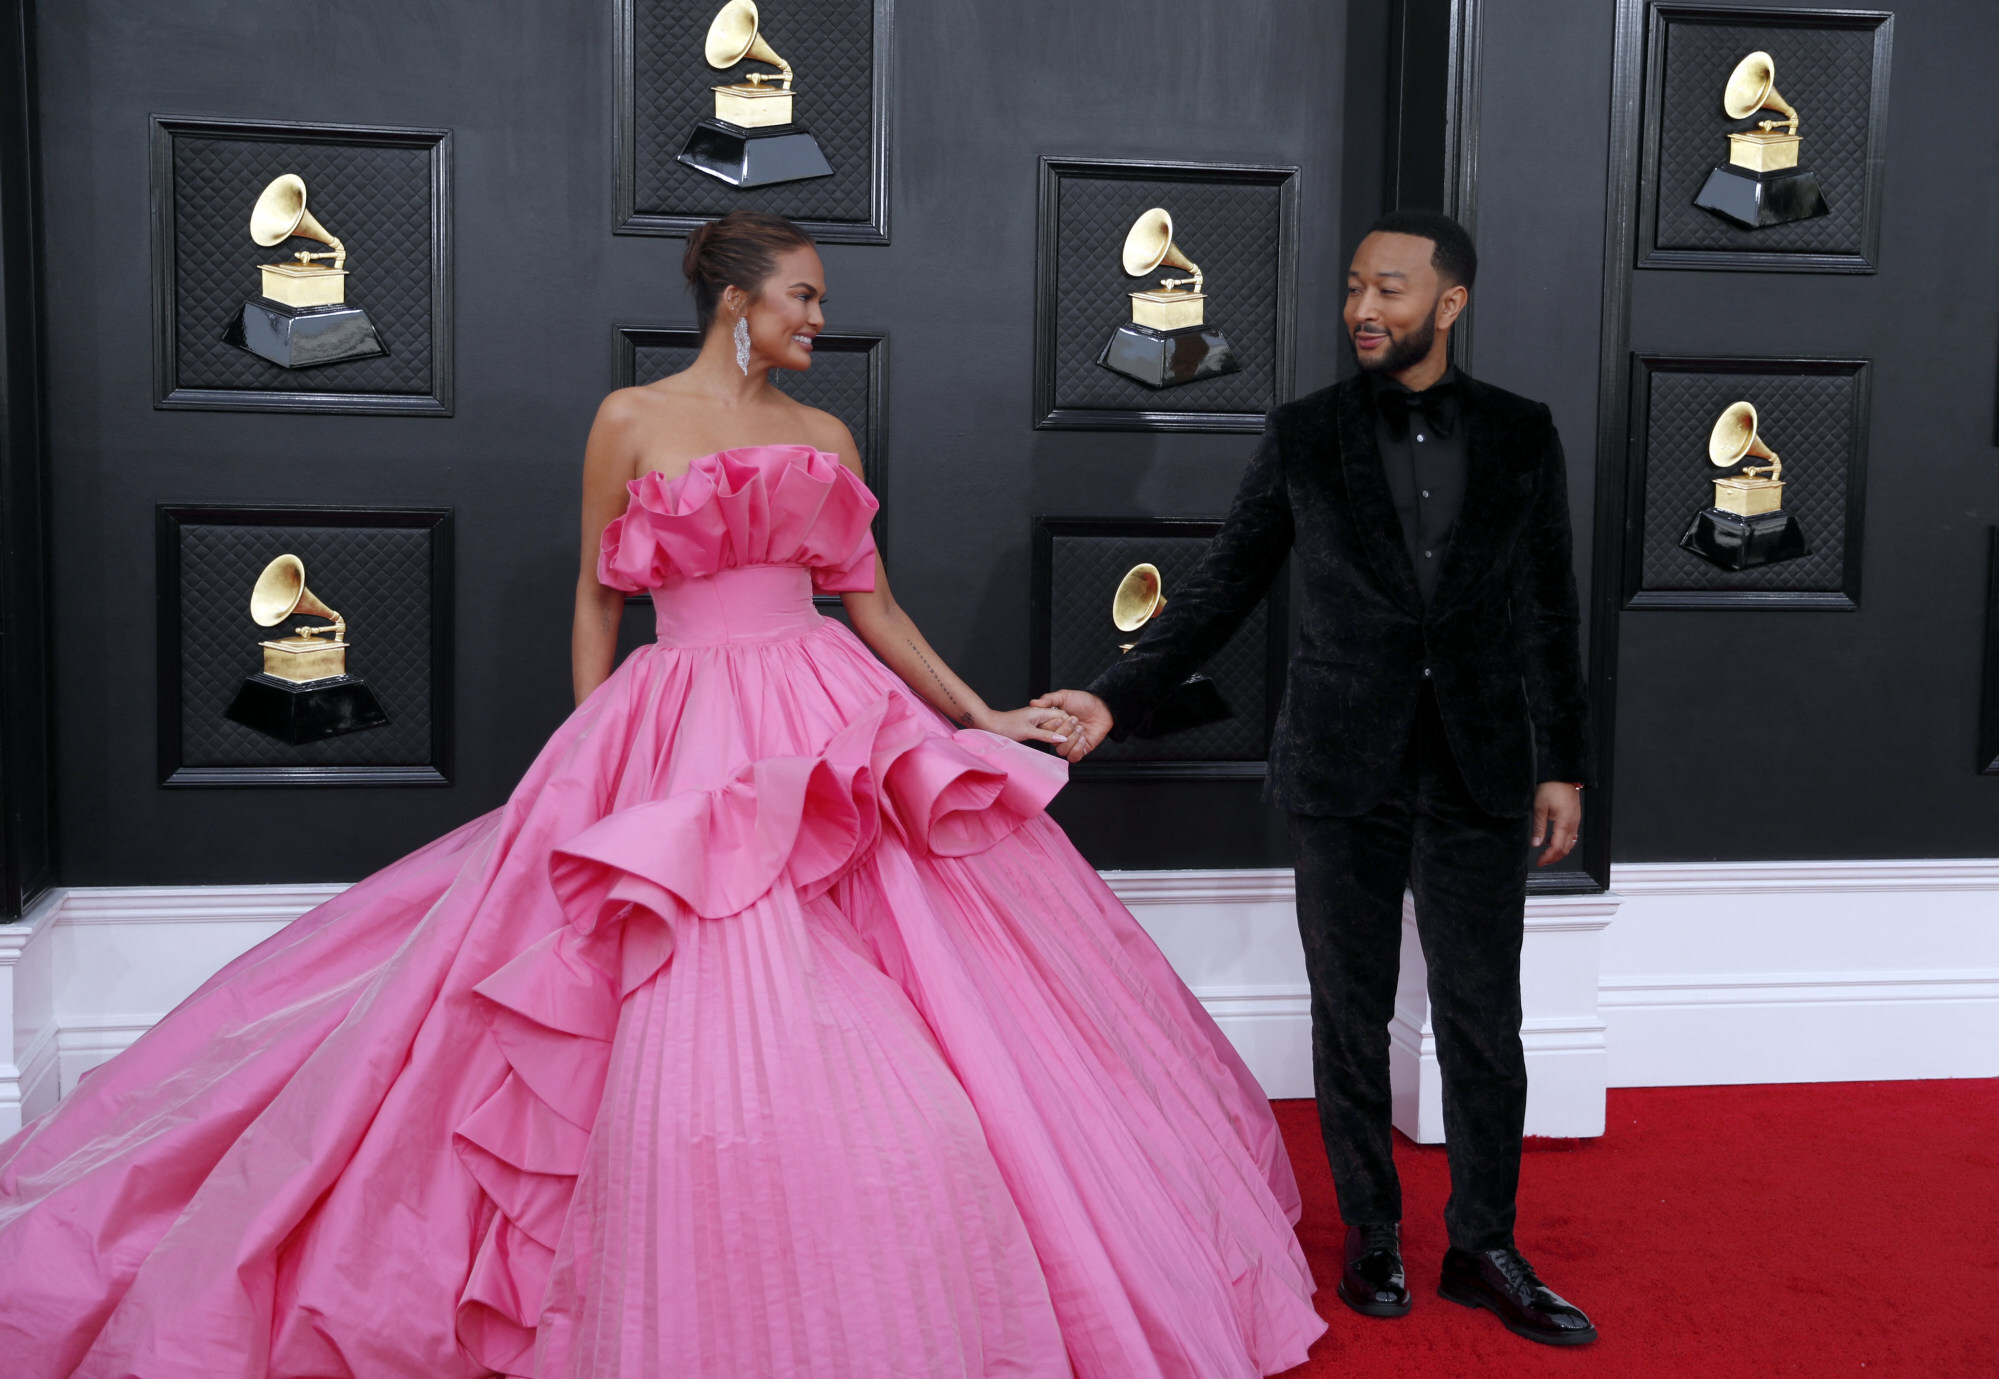 Chrissy Teigen and John Legend shared a look that said “we nailed it” when they appeared on the red carpet at this year’s Grammy Awards. Photo: Reuters